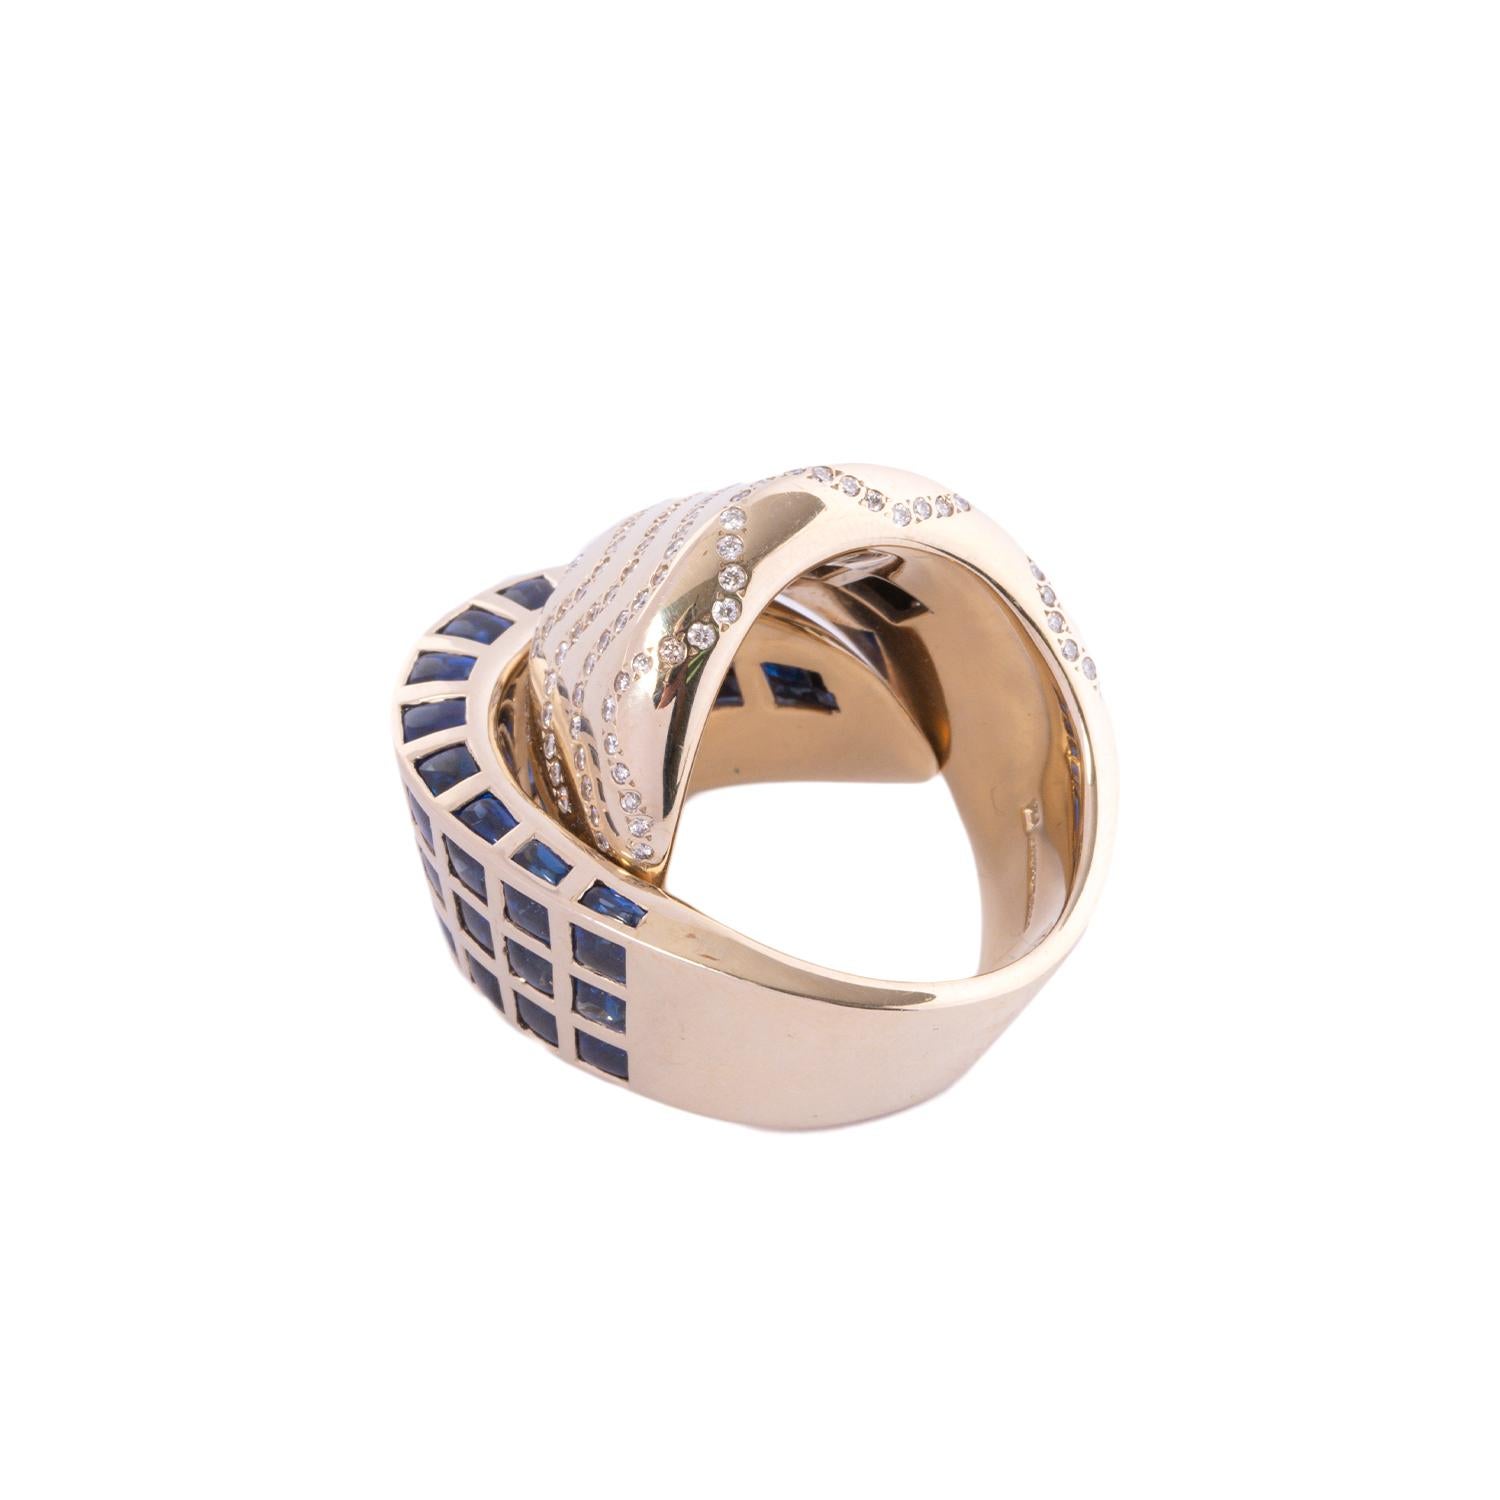 Vhernier  Ring in 18K yellow solid gold,  7,45 Carat Sapphires and Diamonds brillant cut 0,77


Vhernier's roots can be traced back to the desire to create modern pieces of jewelry unlike any others, filling an empty niche in the sector. Back in